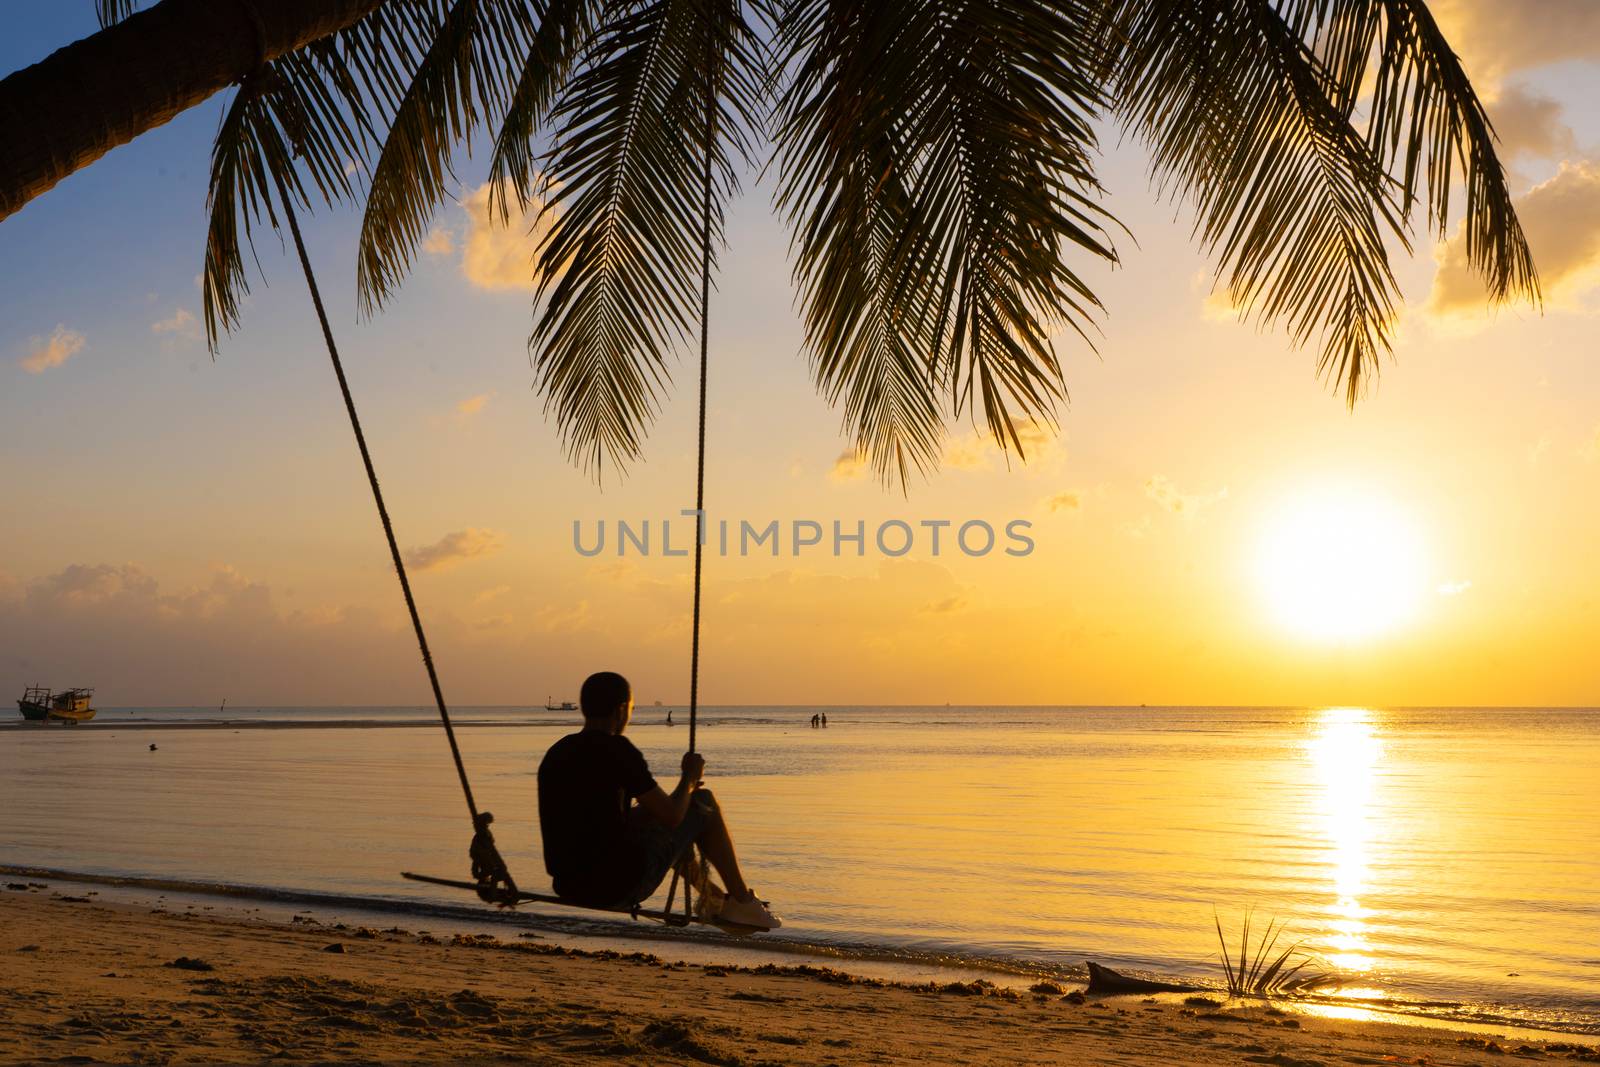 The guy enjoys the sunset riding on a swing on the ptropical beach. Silhouettes of a guy on a swing hanging on a palm tree, watching the sunset in the water